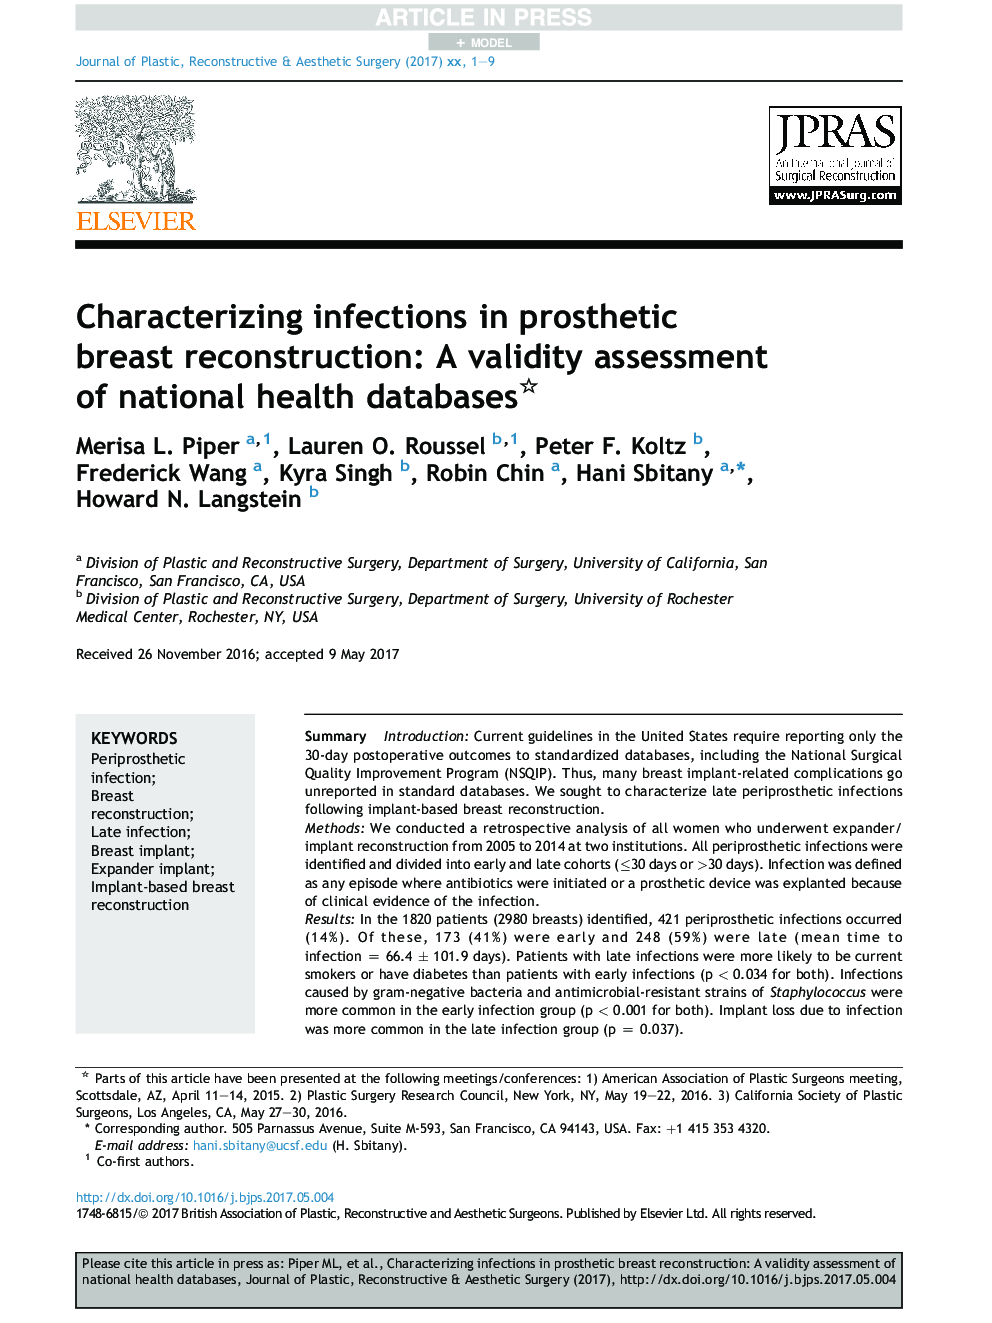 Characterizing infections in prosthetic breast reconstruction: A validity assessment of national health databases